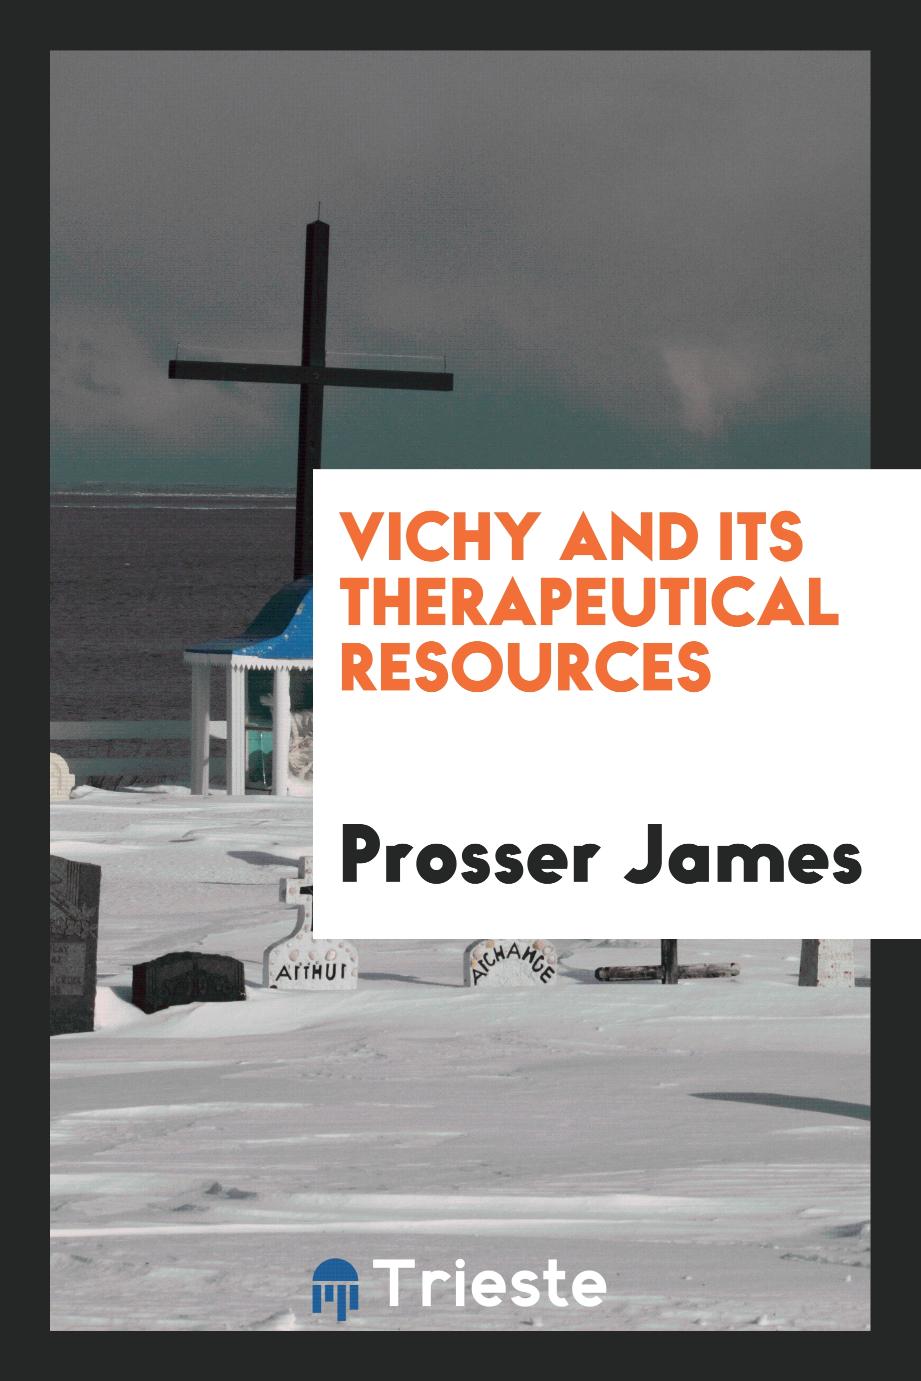 Vichy and its therapeutical resources